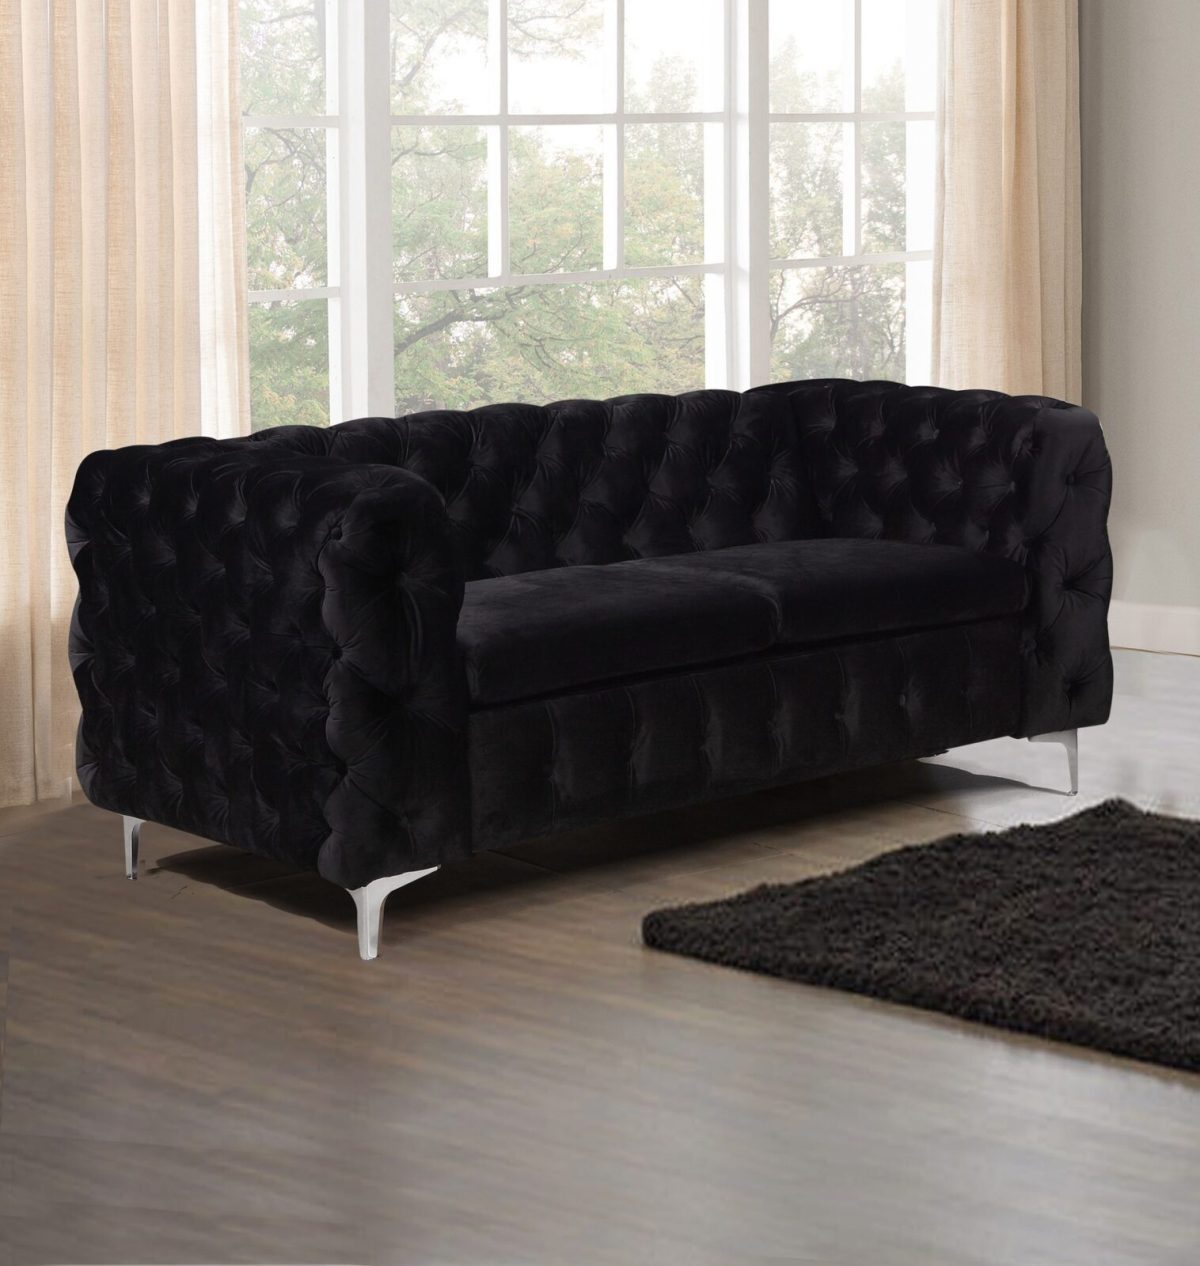 Clydebank Sofa Classic Button Tufted Lounge in Black Velvet Fabric with Metal Legs